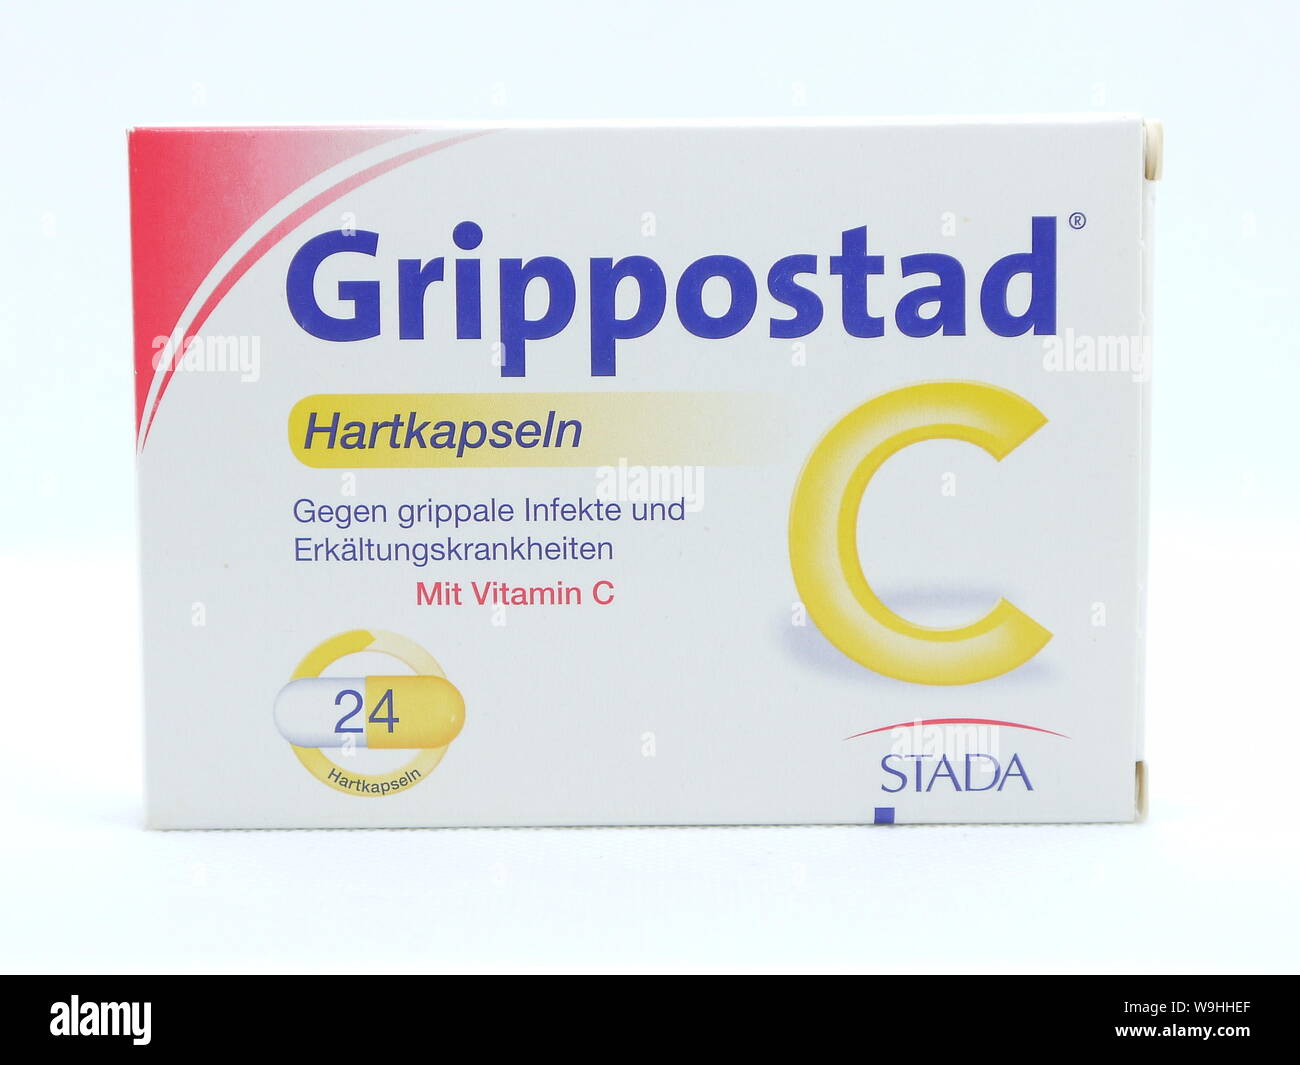 Berlin, Germany - 2019: Grippostad. Text in german: Grippostad hard capsules. Against influenza infections. With vitamin C. Stock Photo